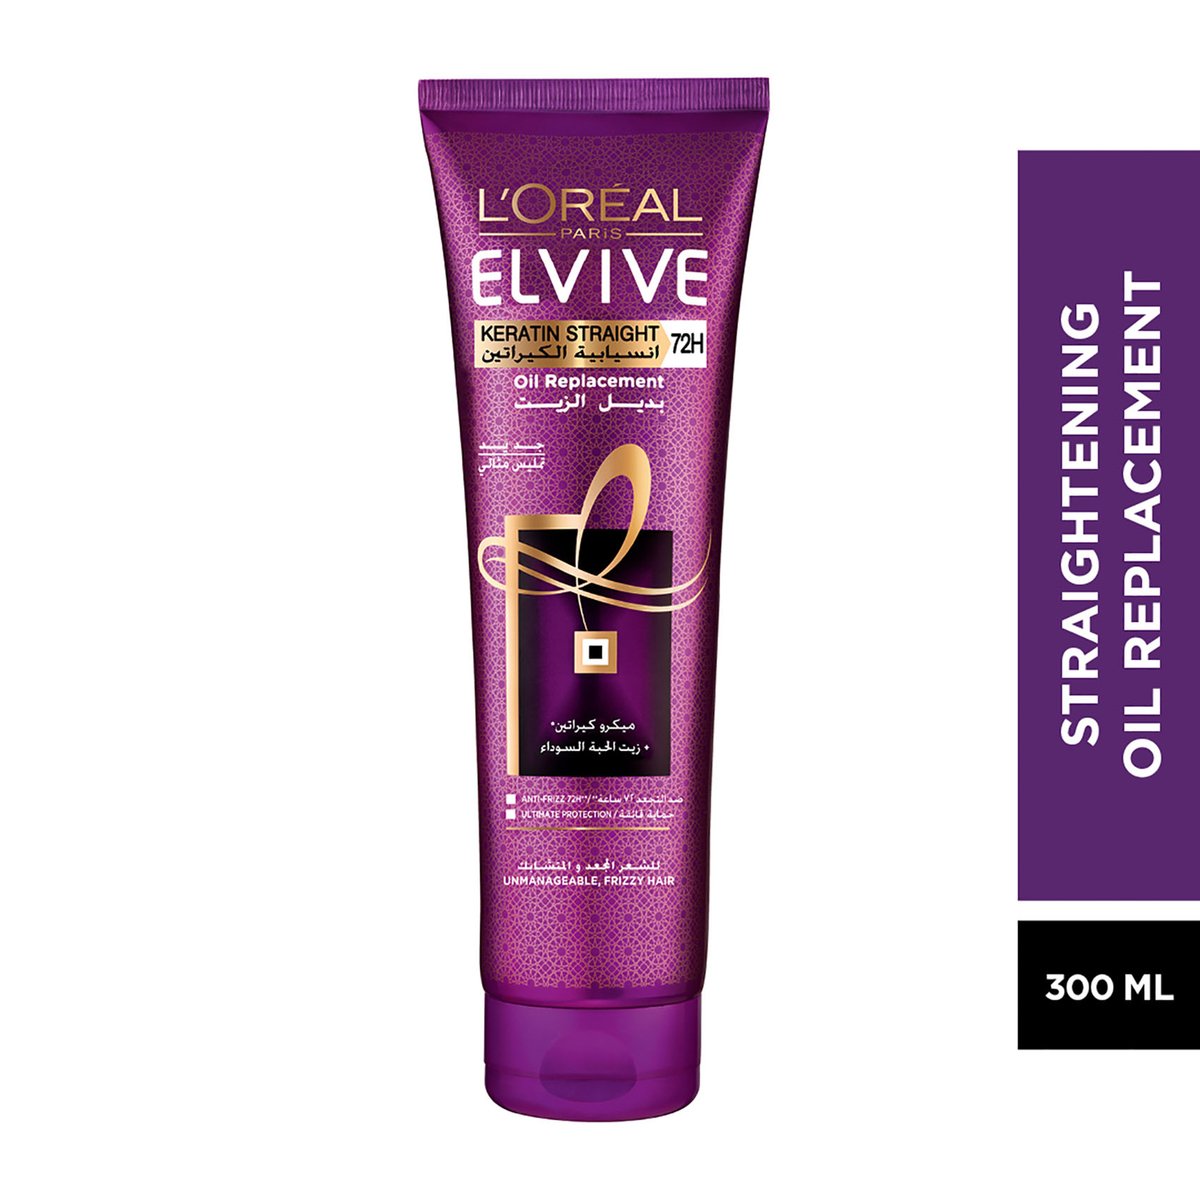 L'Oreal Elvive Keratin Straight Oil Replacement 300 ml